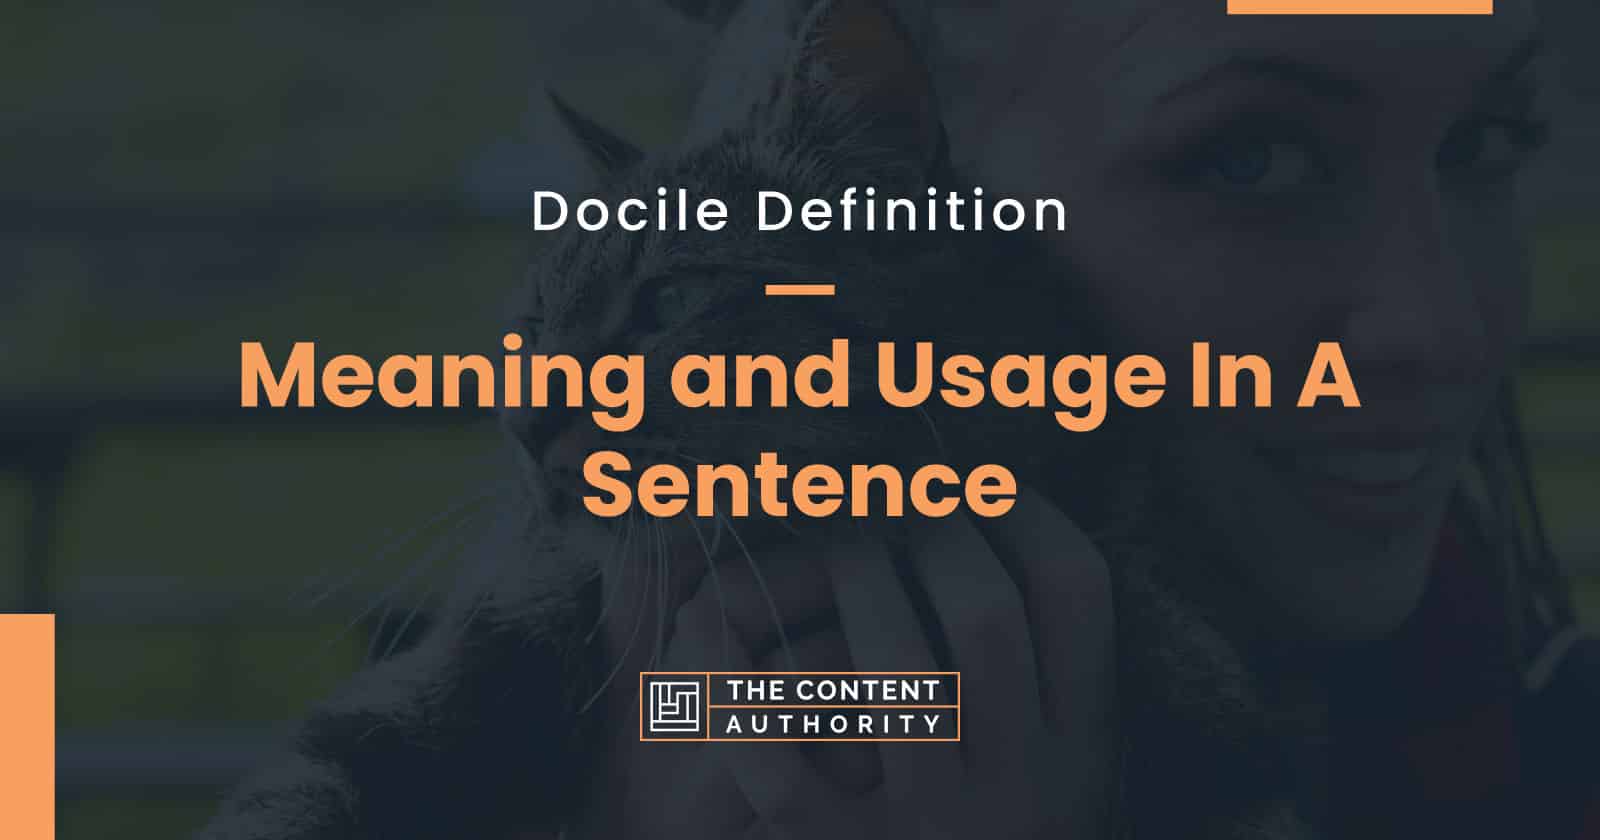 Docile Definition &#8211; Meaning and Usage In A Sentence